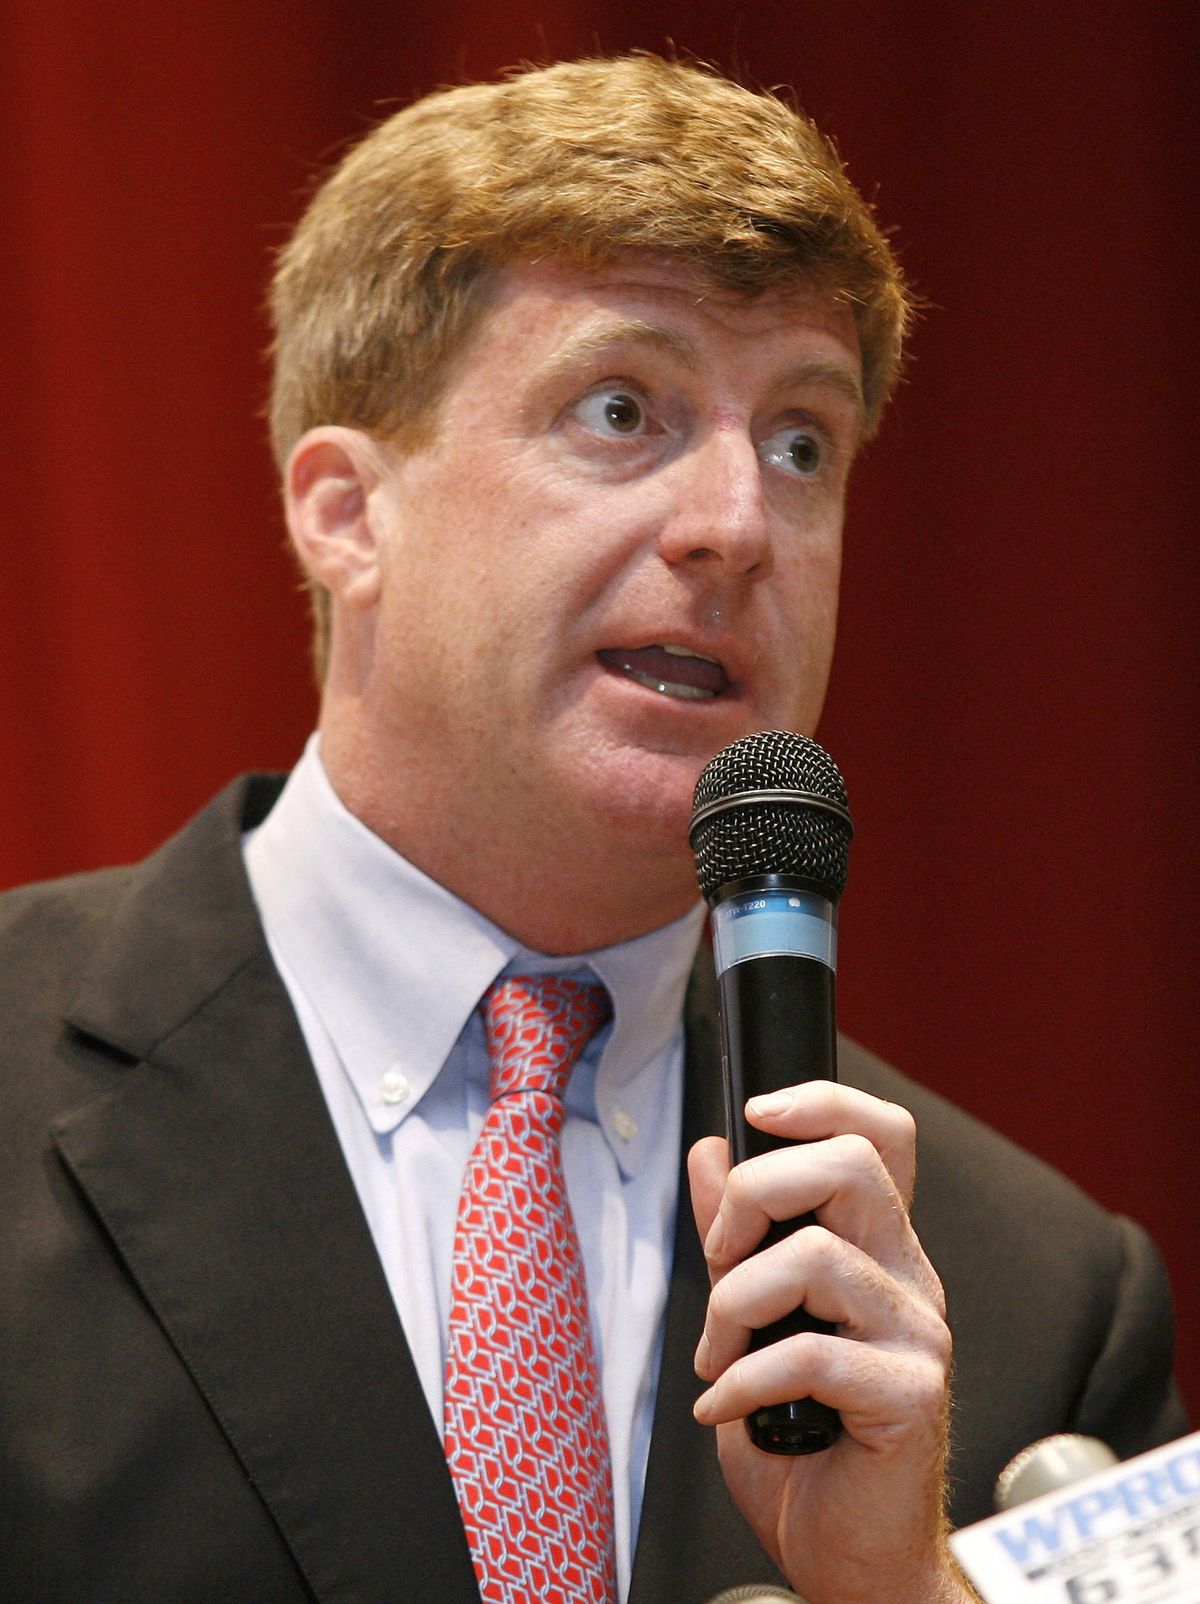 Rep. Patrick Kennedy, D-R.I., seen here in September, is the son of the late Sen. Edward Kennedy, D-Mass.  (Associated Press)